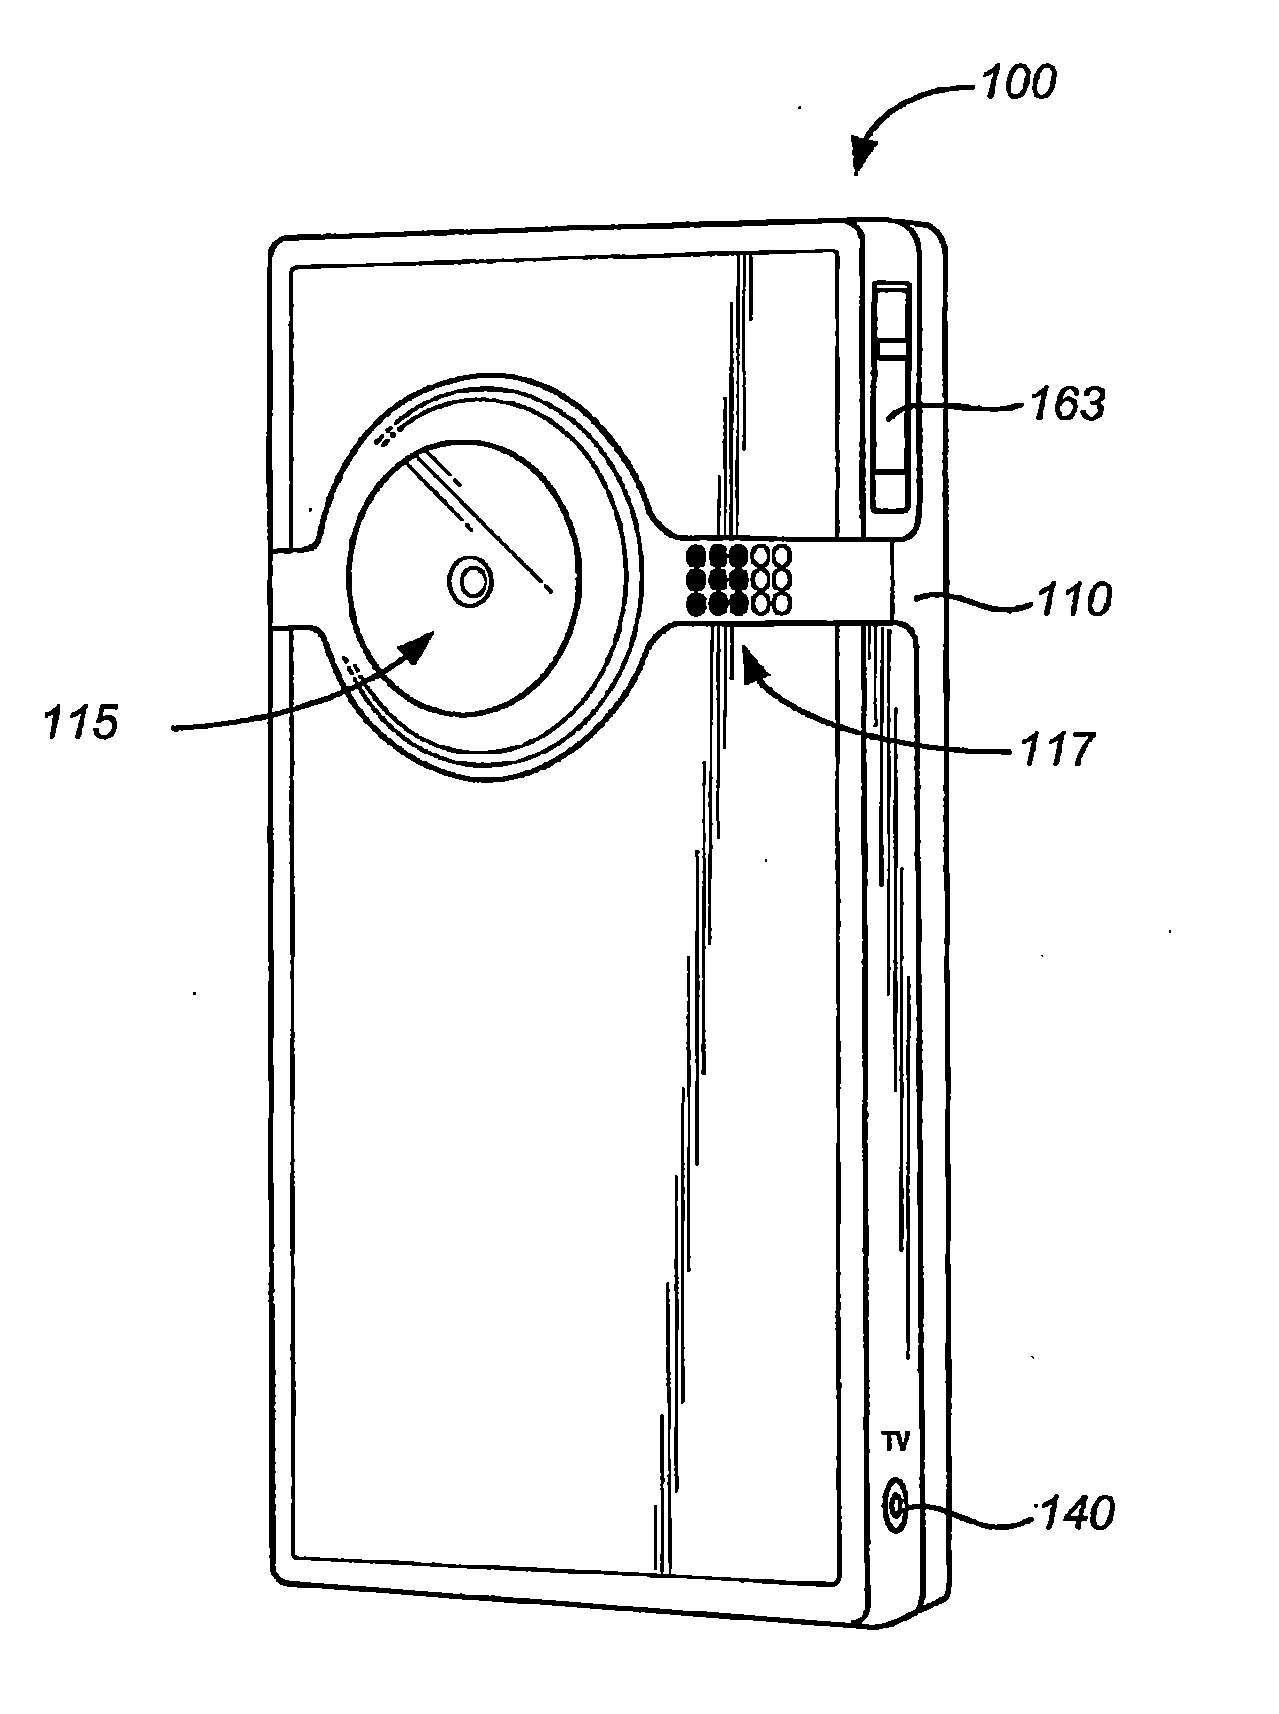 Video camera with multifunction connection ports